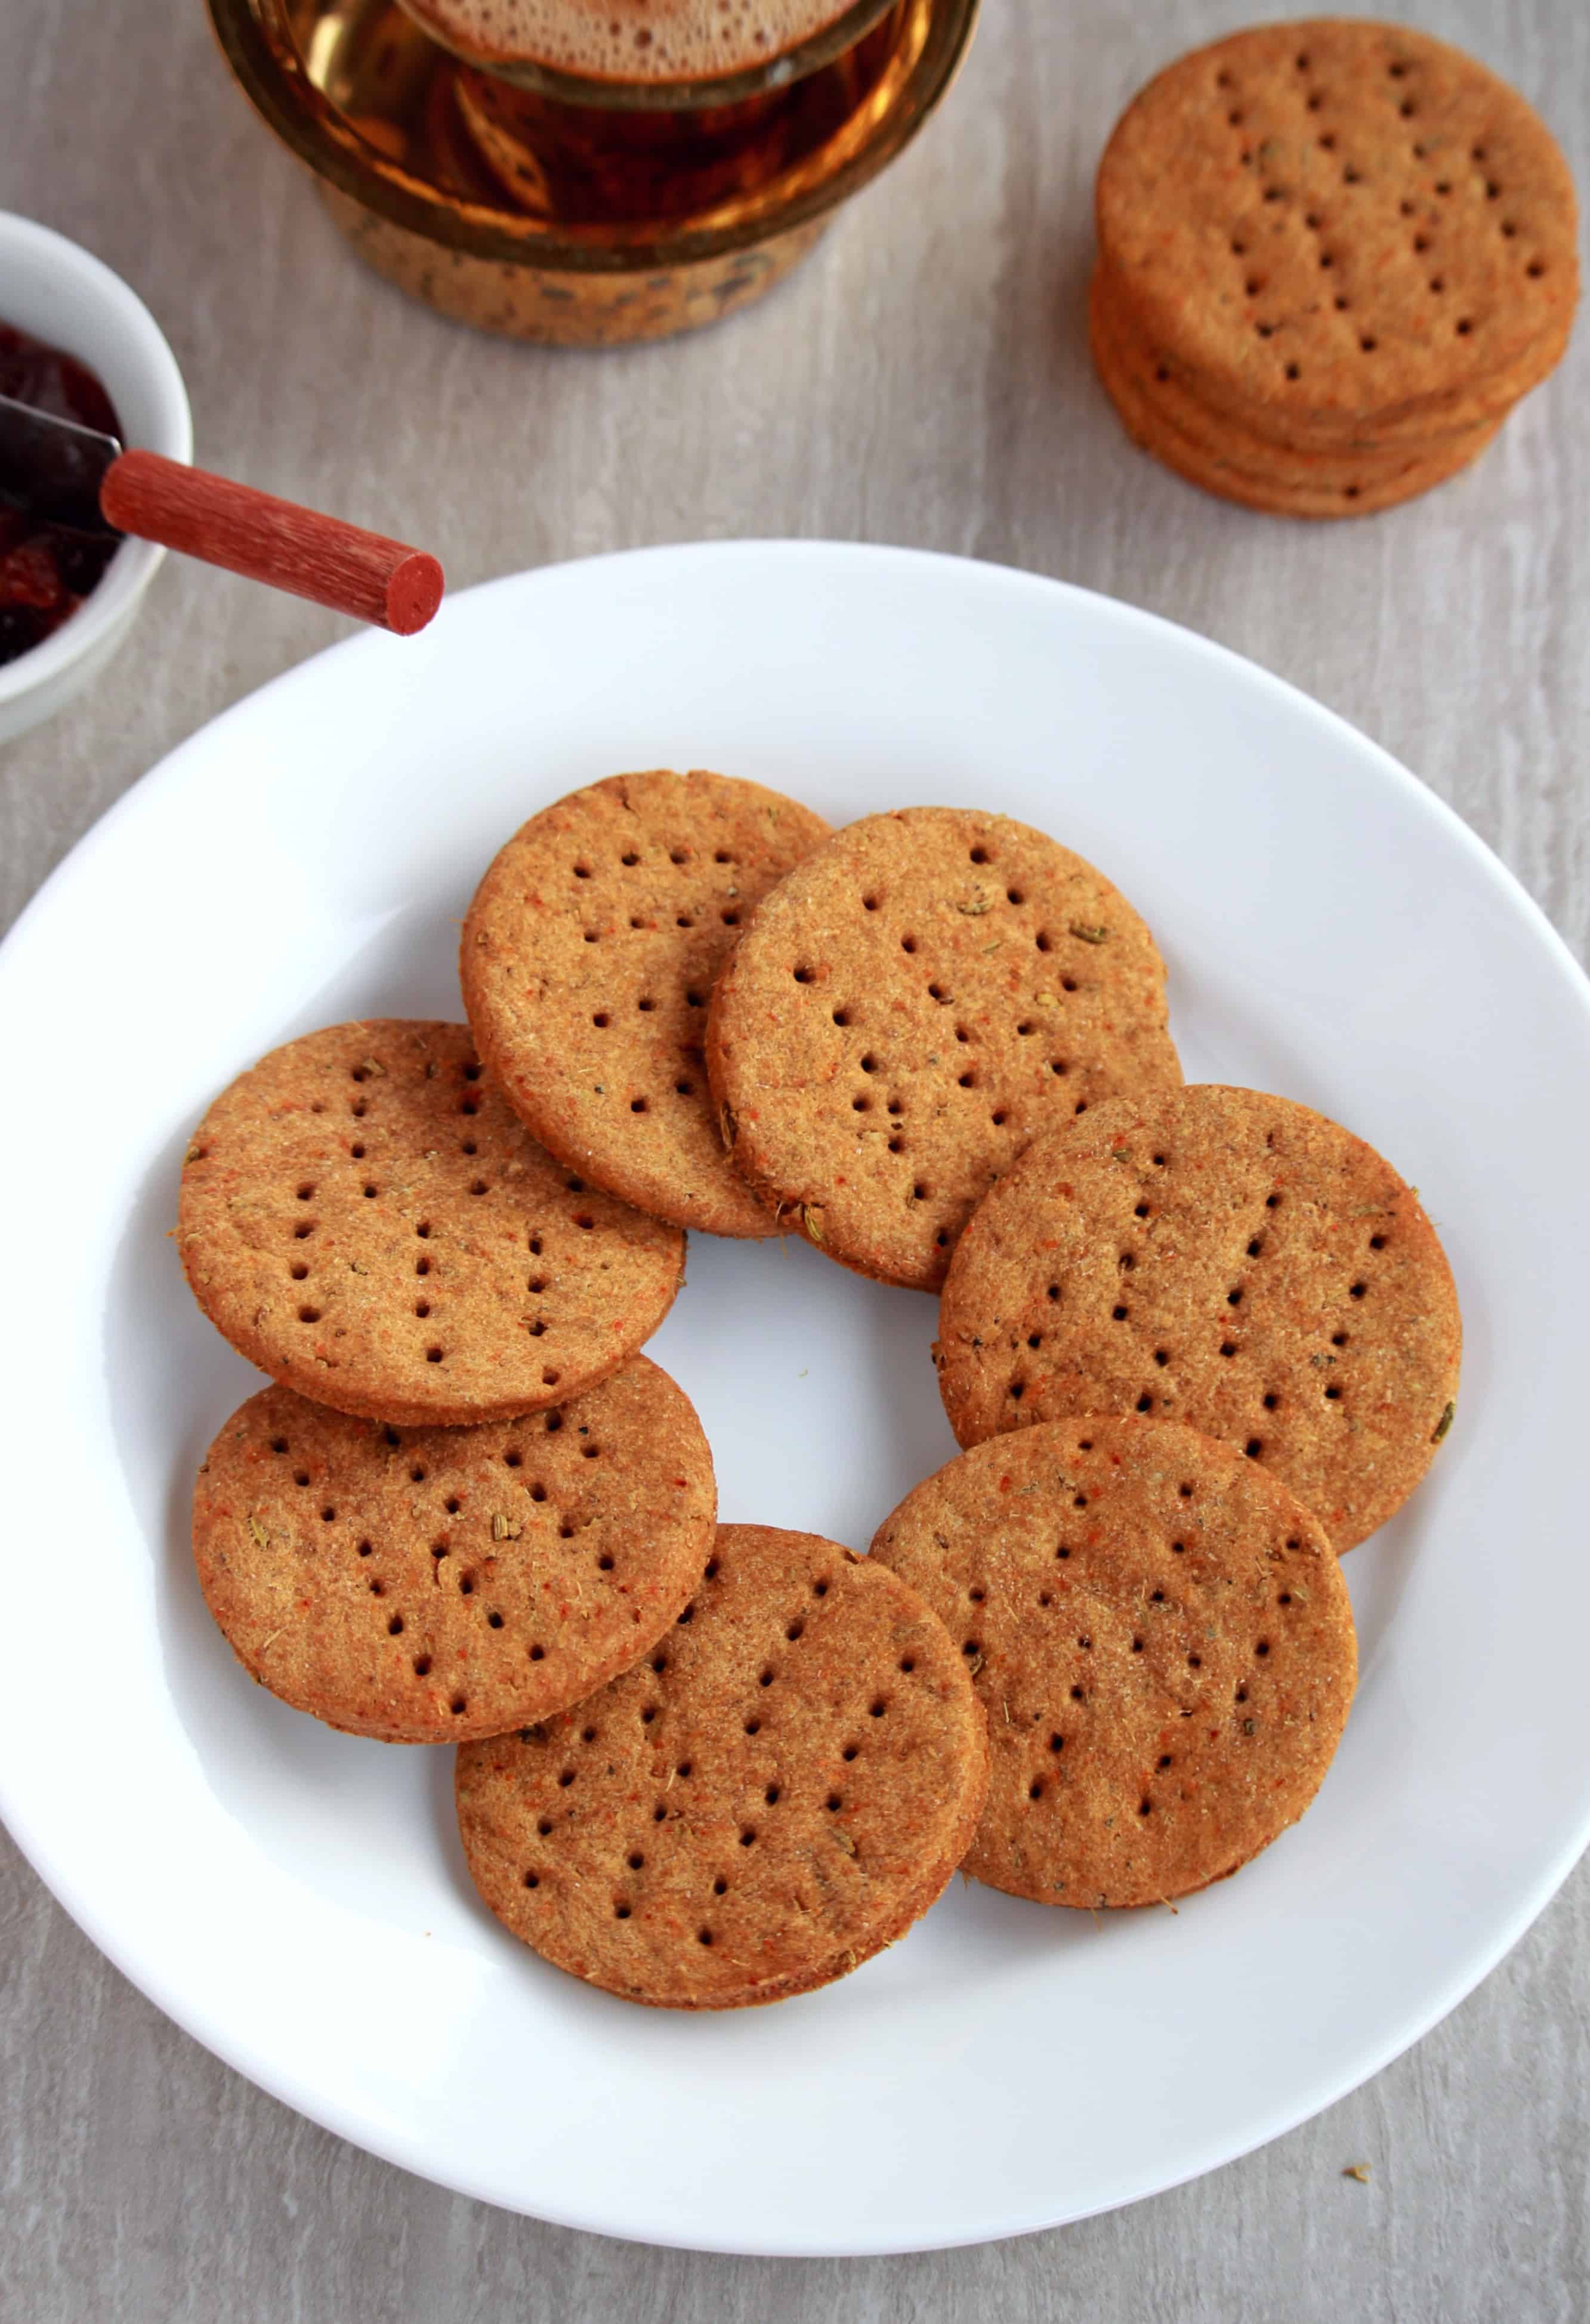 Baked Barley Crackers with coffee and spread